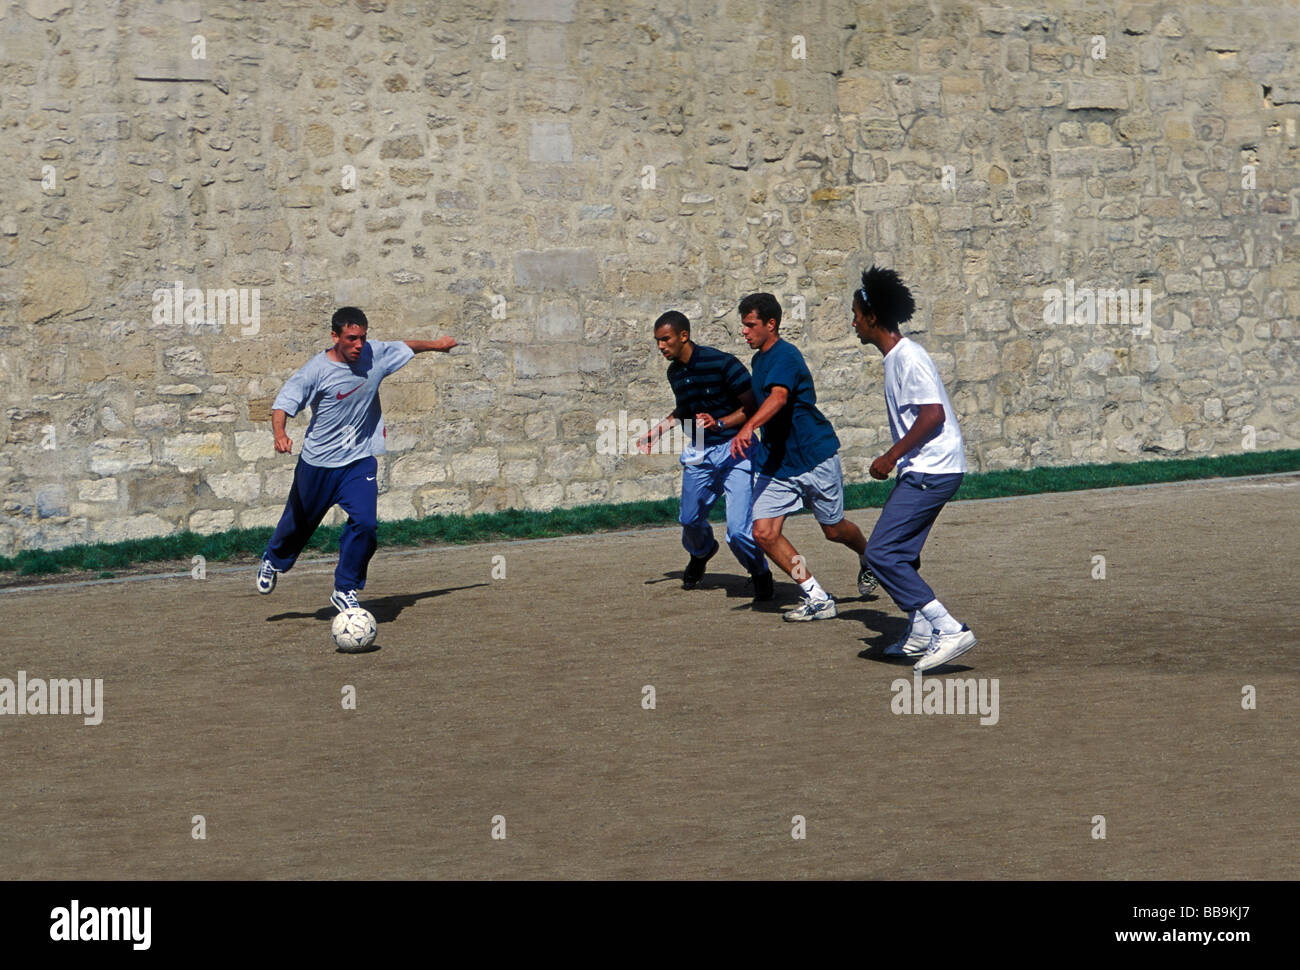 French students, gym class, soccer player, soccer players, playing soccer, soccer game, Lycee Charlemagne, Marais District, Paris, France, Europe Stock Photo